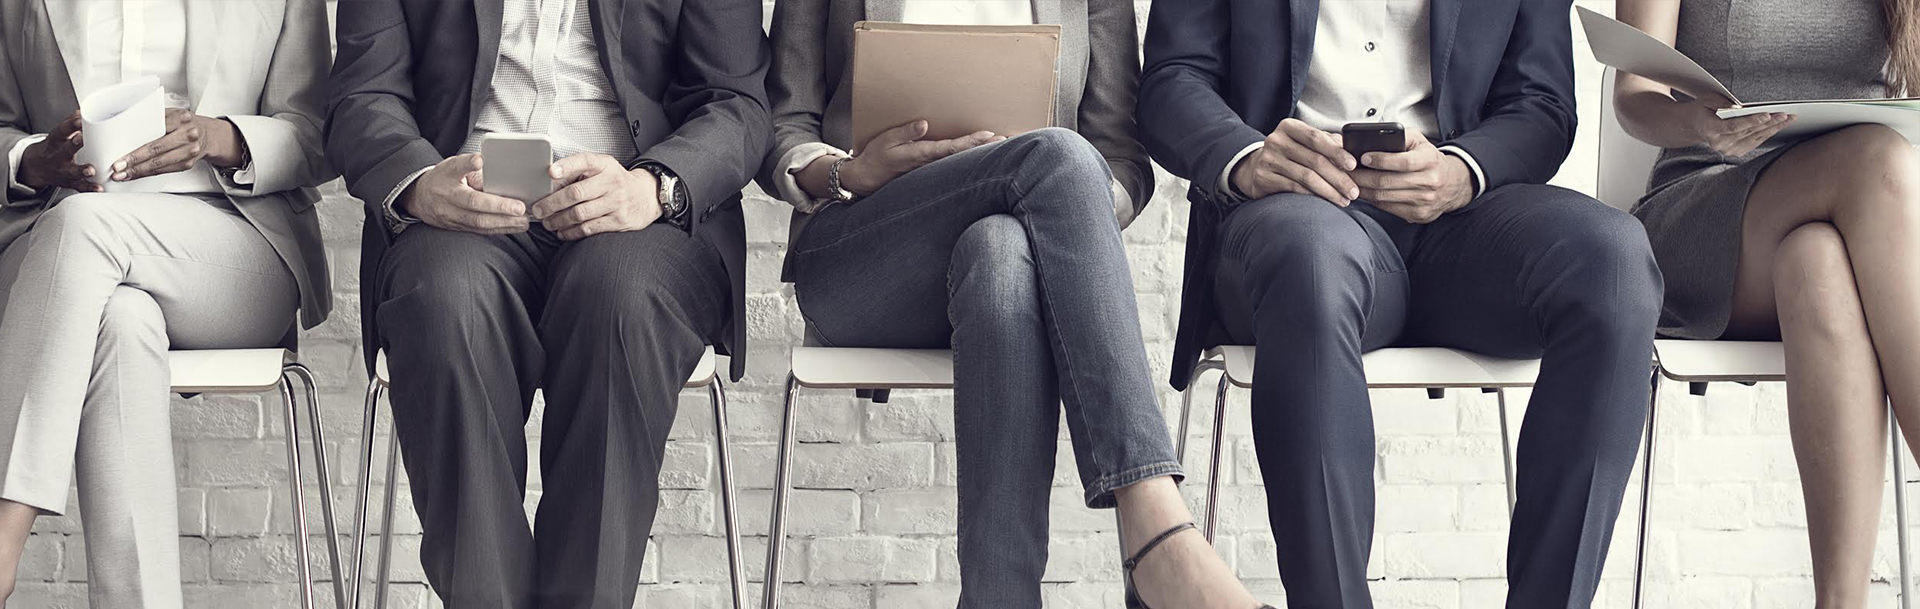 Abstract image of business people sitting